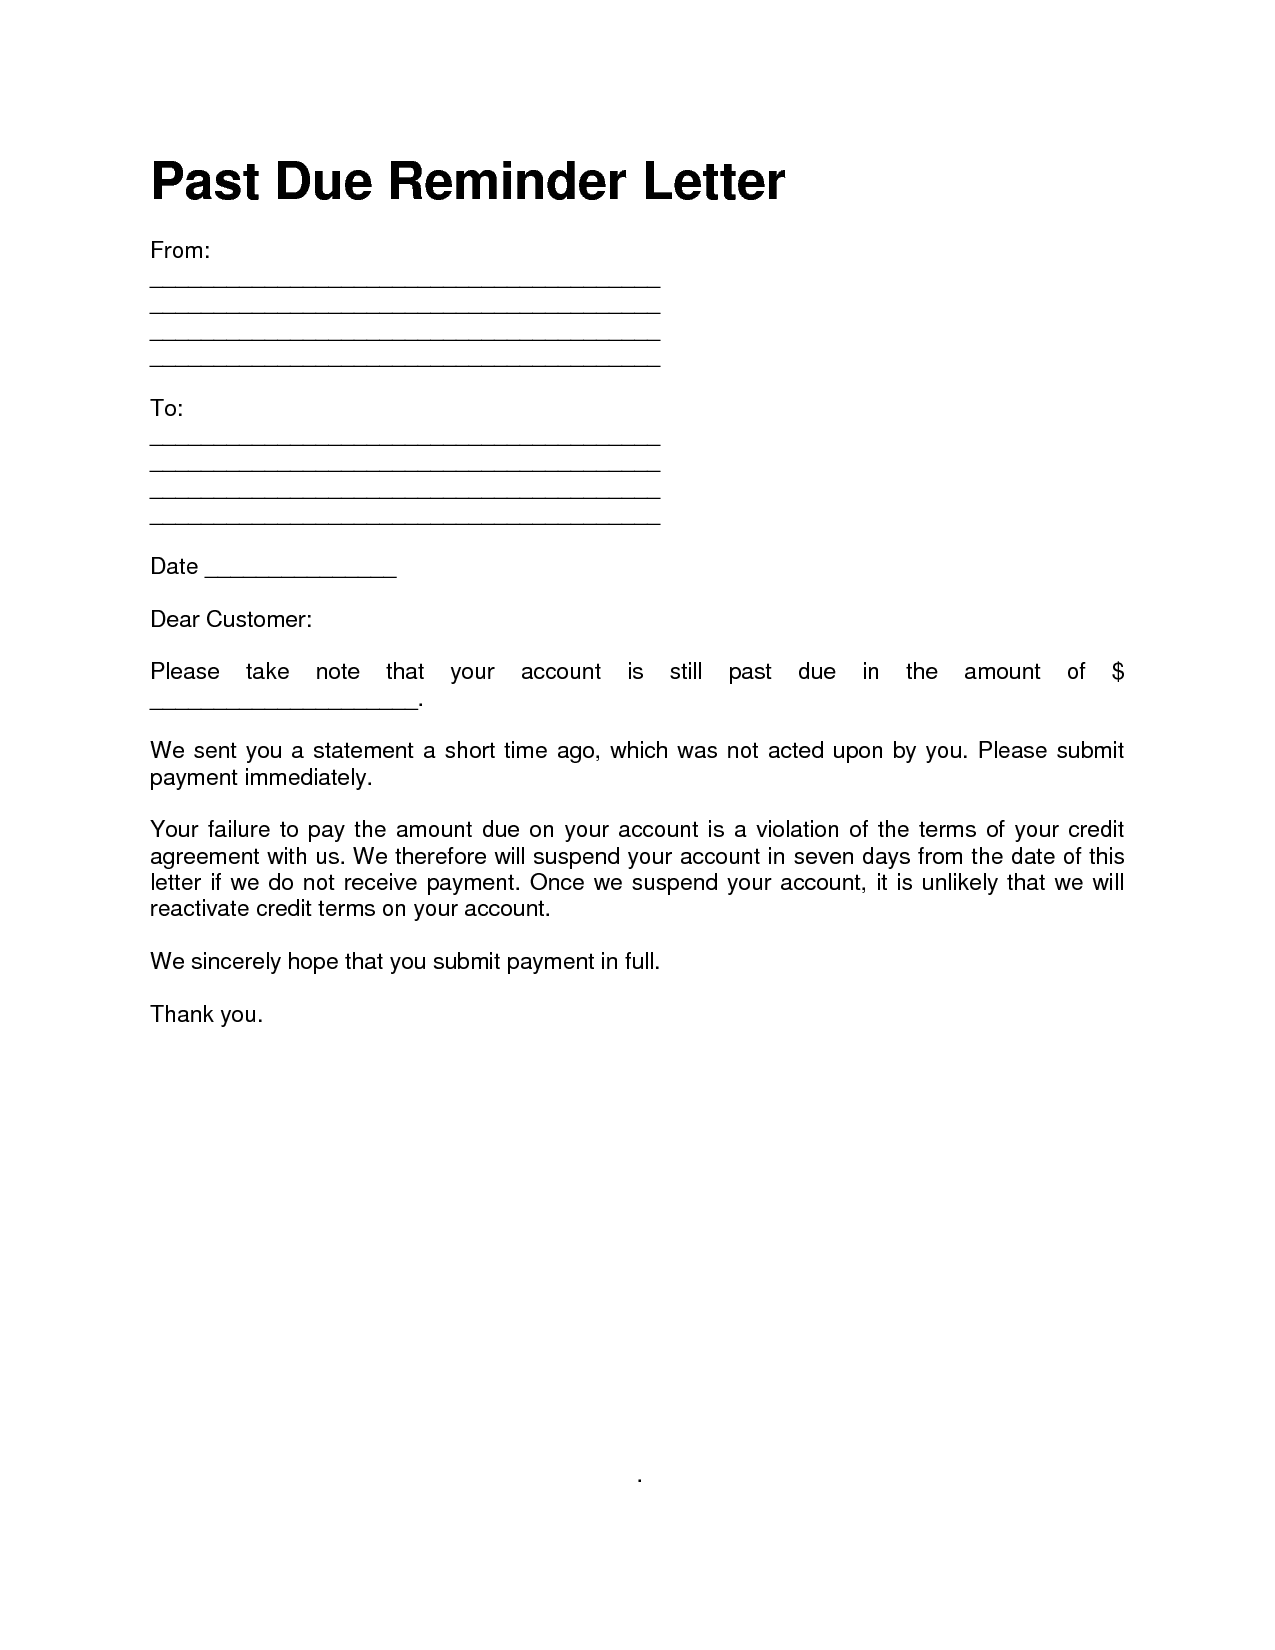 Past Due Letter Free Printable Documents